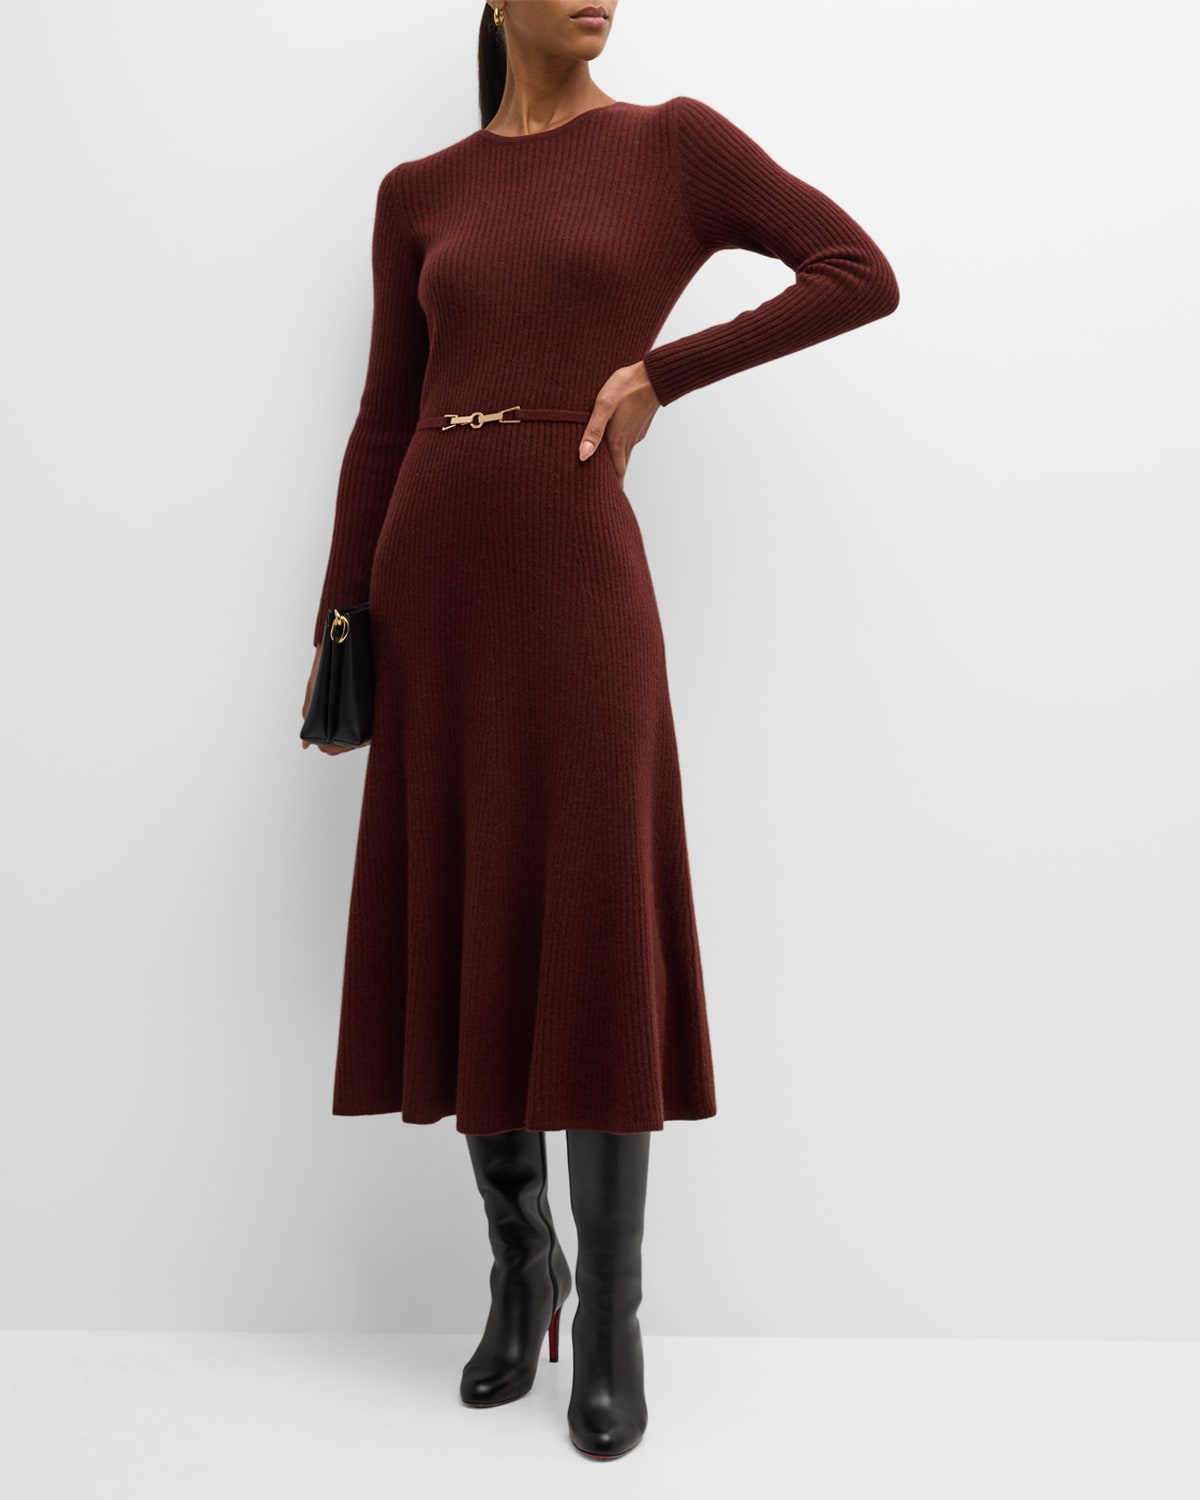 Elie Tahari The Leith Belted Cashmere Midi Sweater Dress